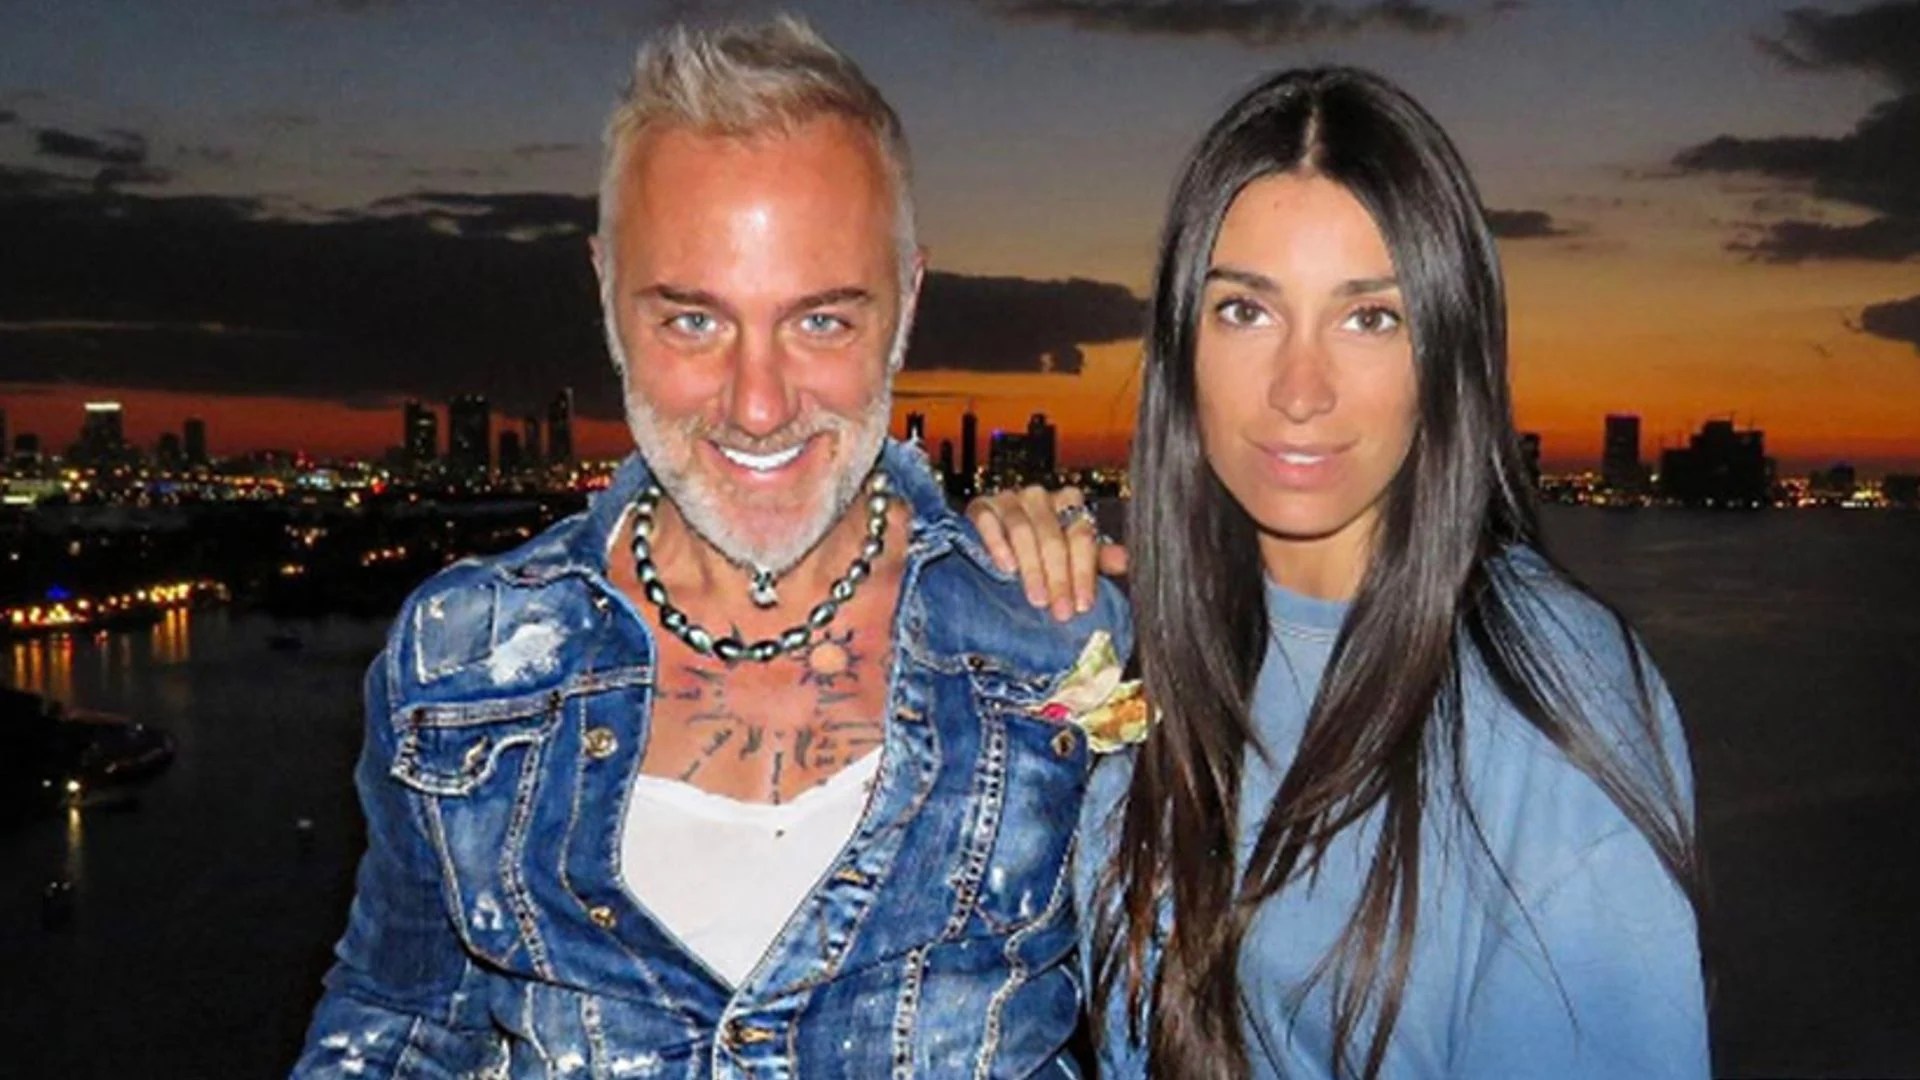 Gianluca Vacchi and Gabriele split after three years together